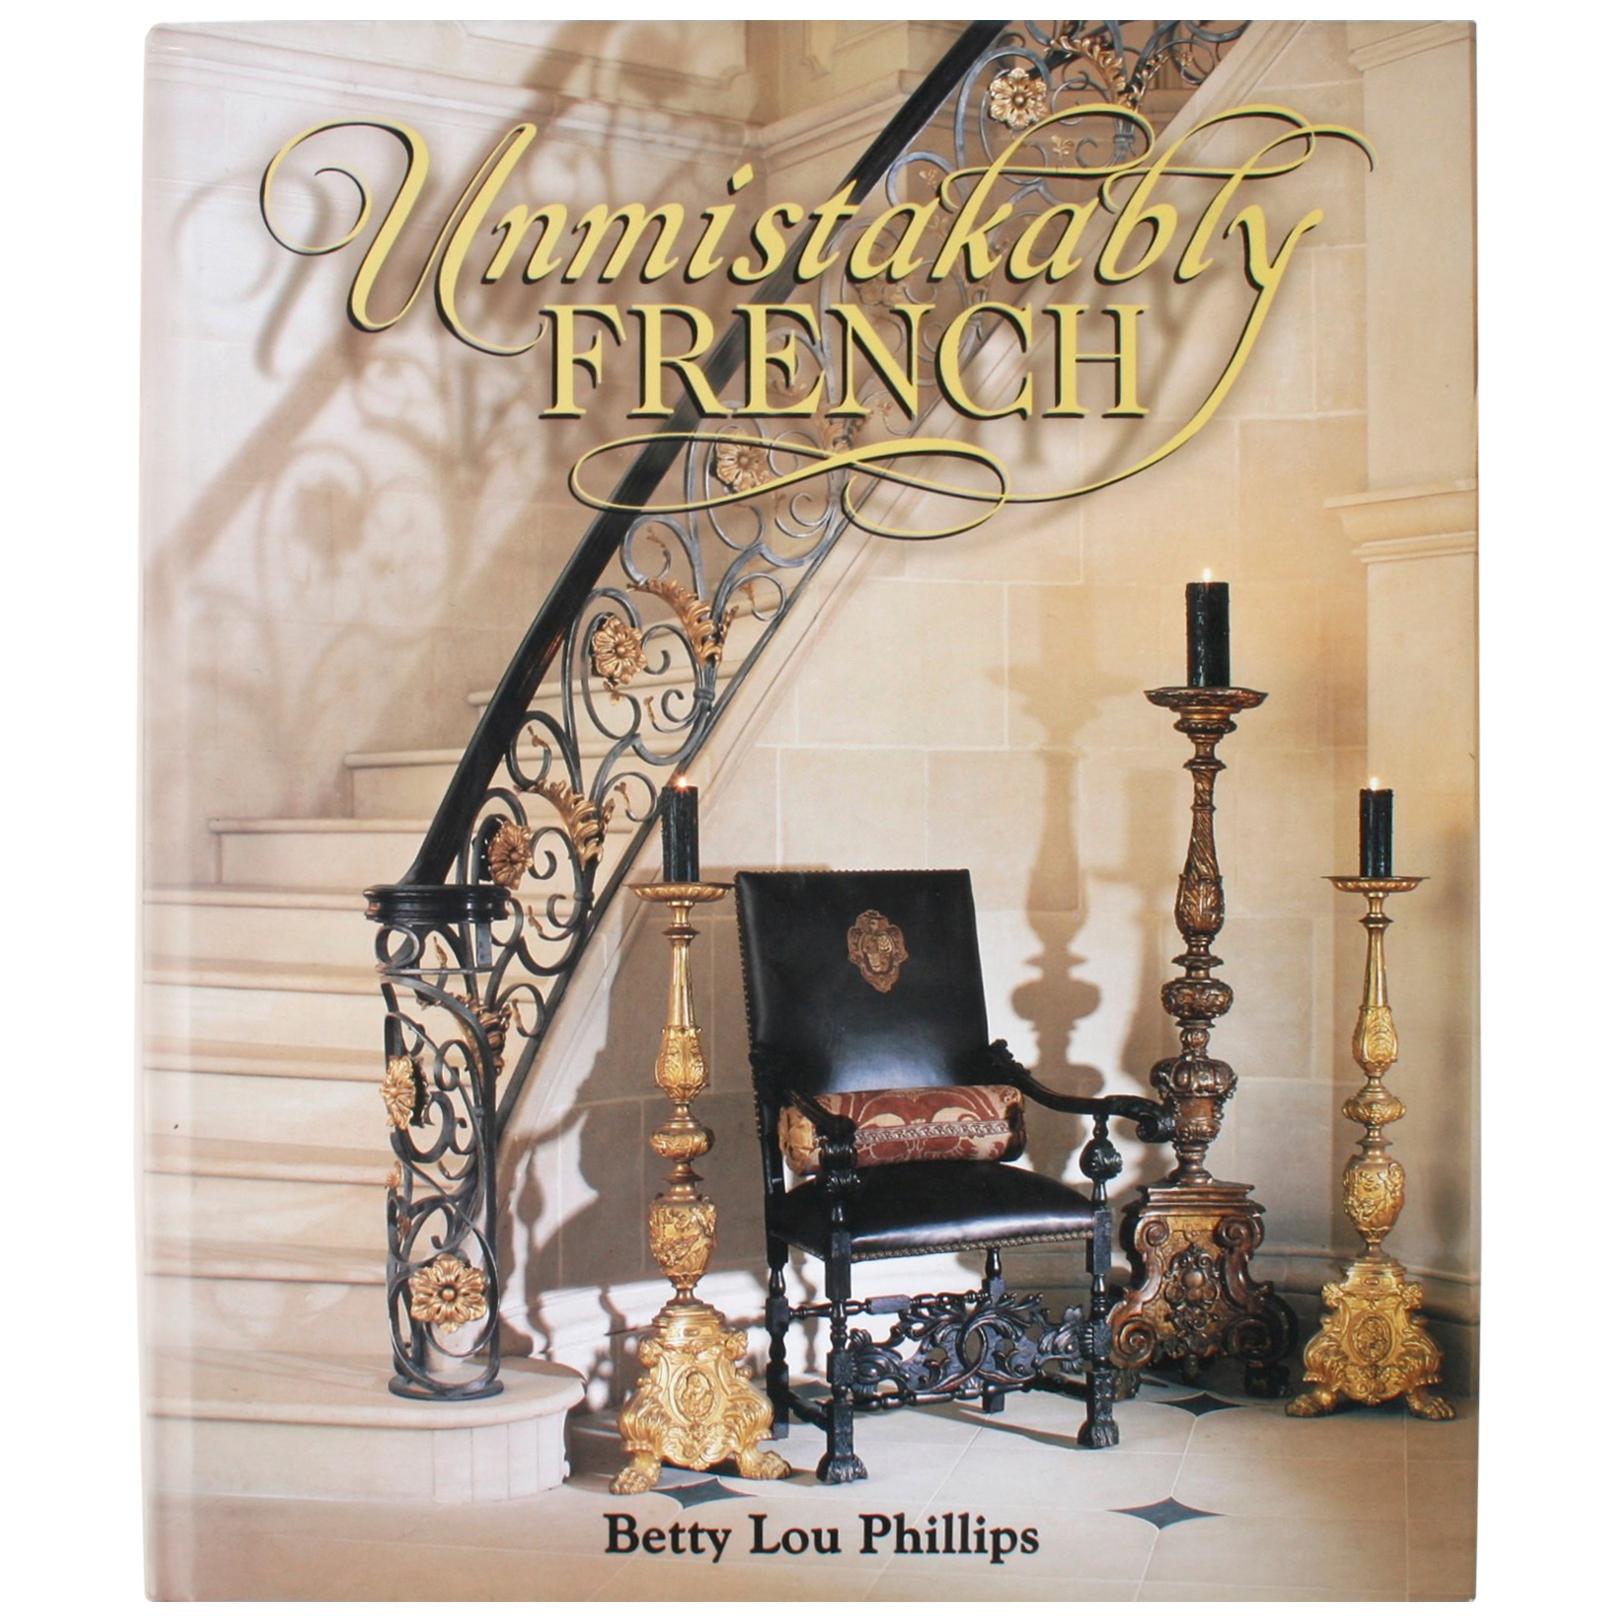 Unmistakably French, First Edition by Betty Lou Phillips